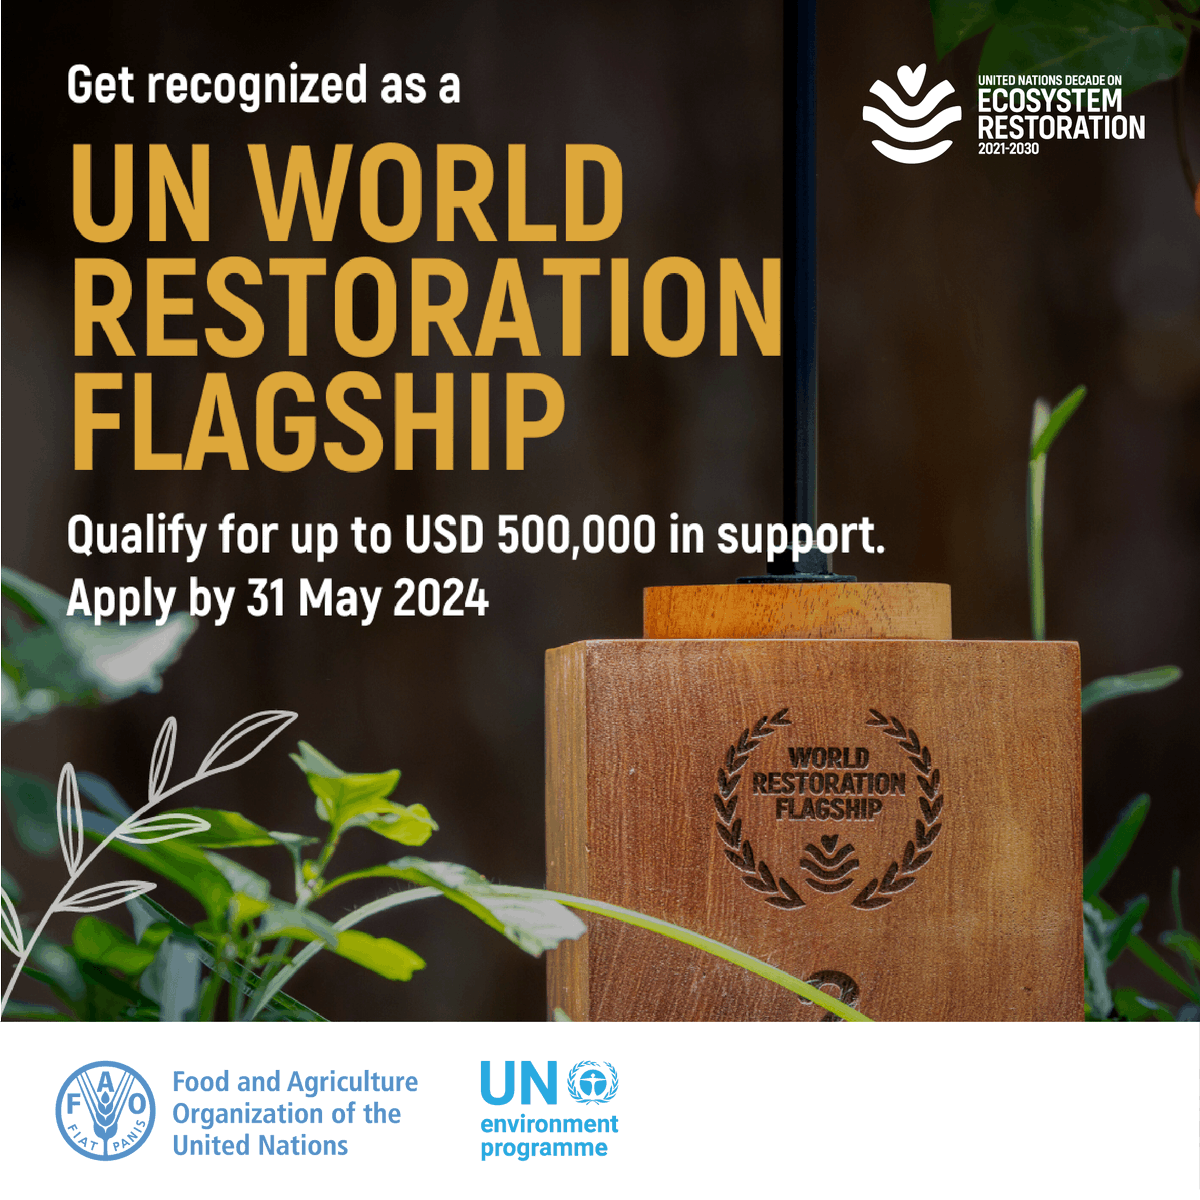 Are you from a country or region whose efforts in restoring an ecosystem could inspire others around the world? Get recognized as a World Restoration Flagship under the @‌UN Decade on Ecosystem Restoration! Apply by 31 May 👉 bit.ly/442x3ZL #GenerationRestoration